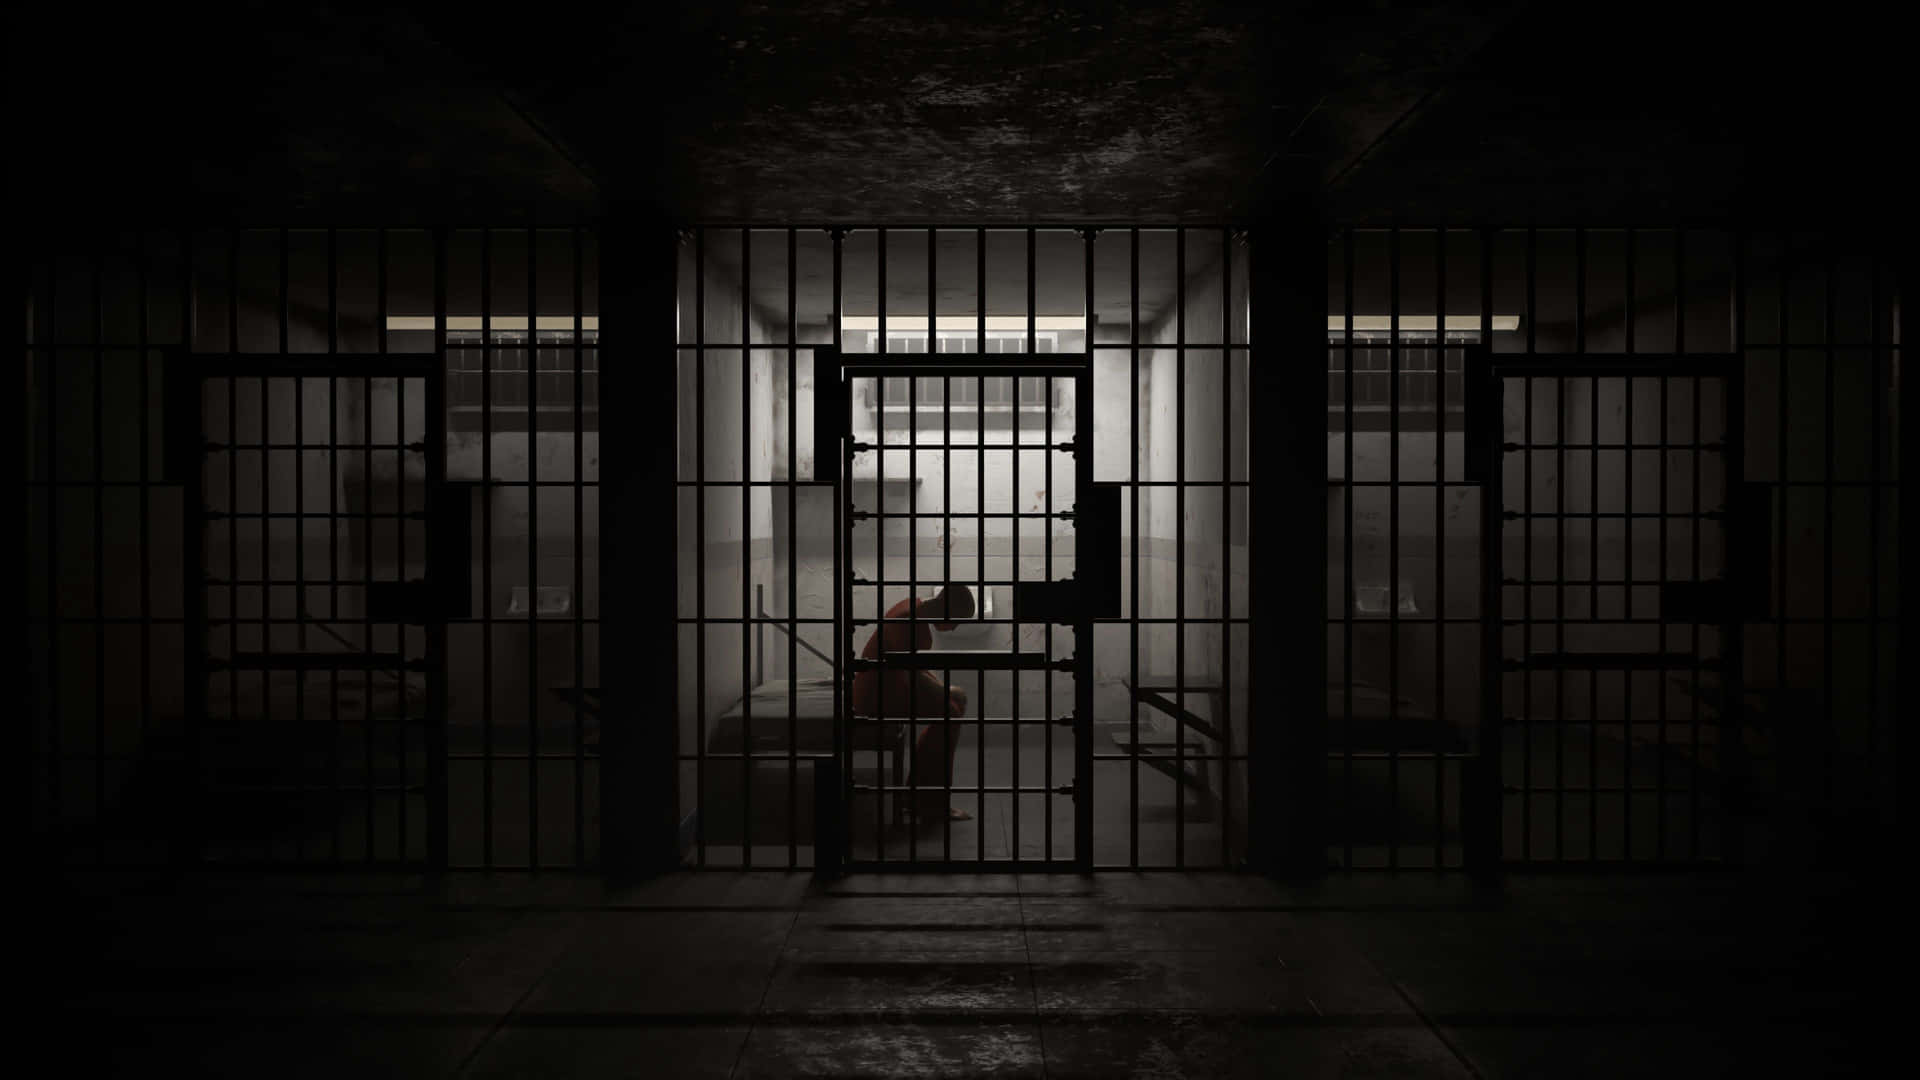 A prisoner in a prison cell longing for freedom.